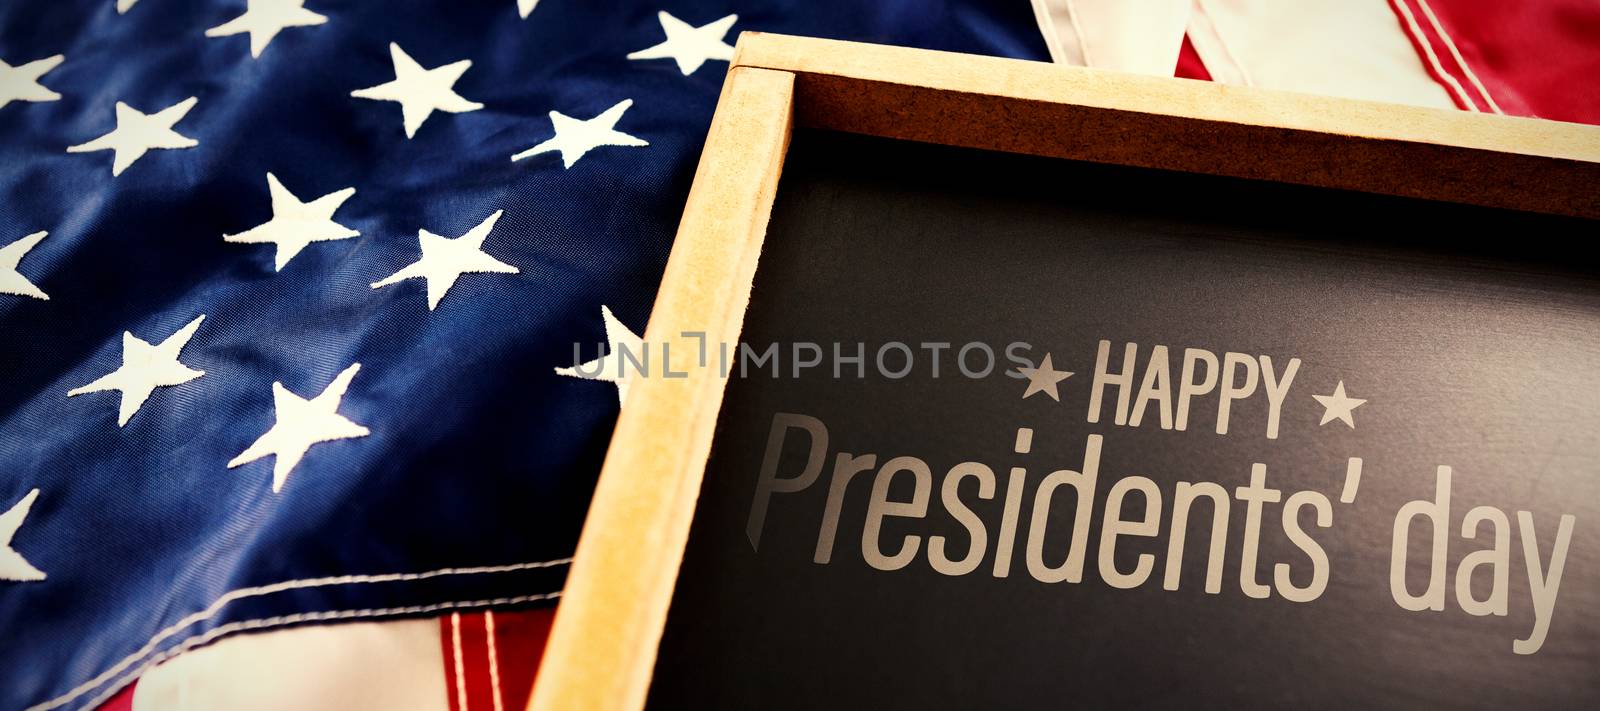 Composite image of happy presidents day by Wavebreakmedia